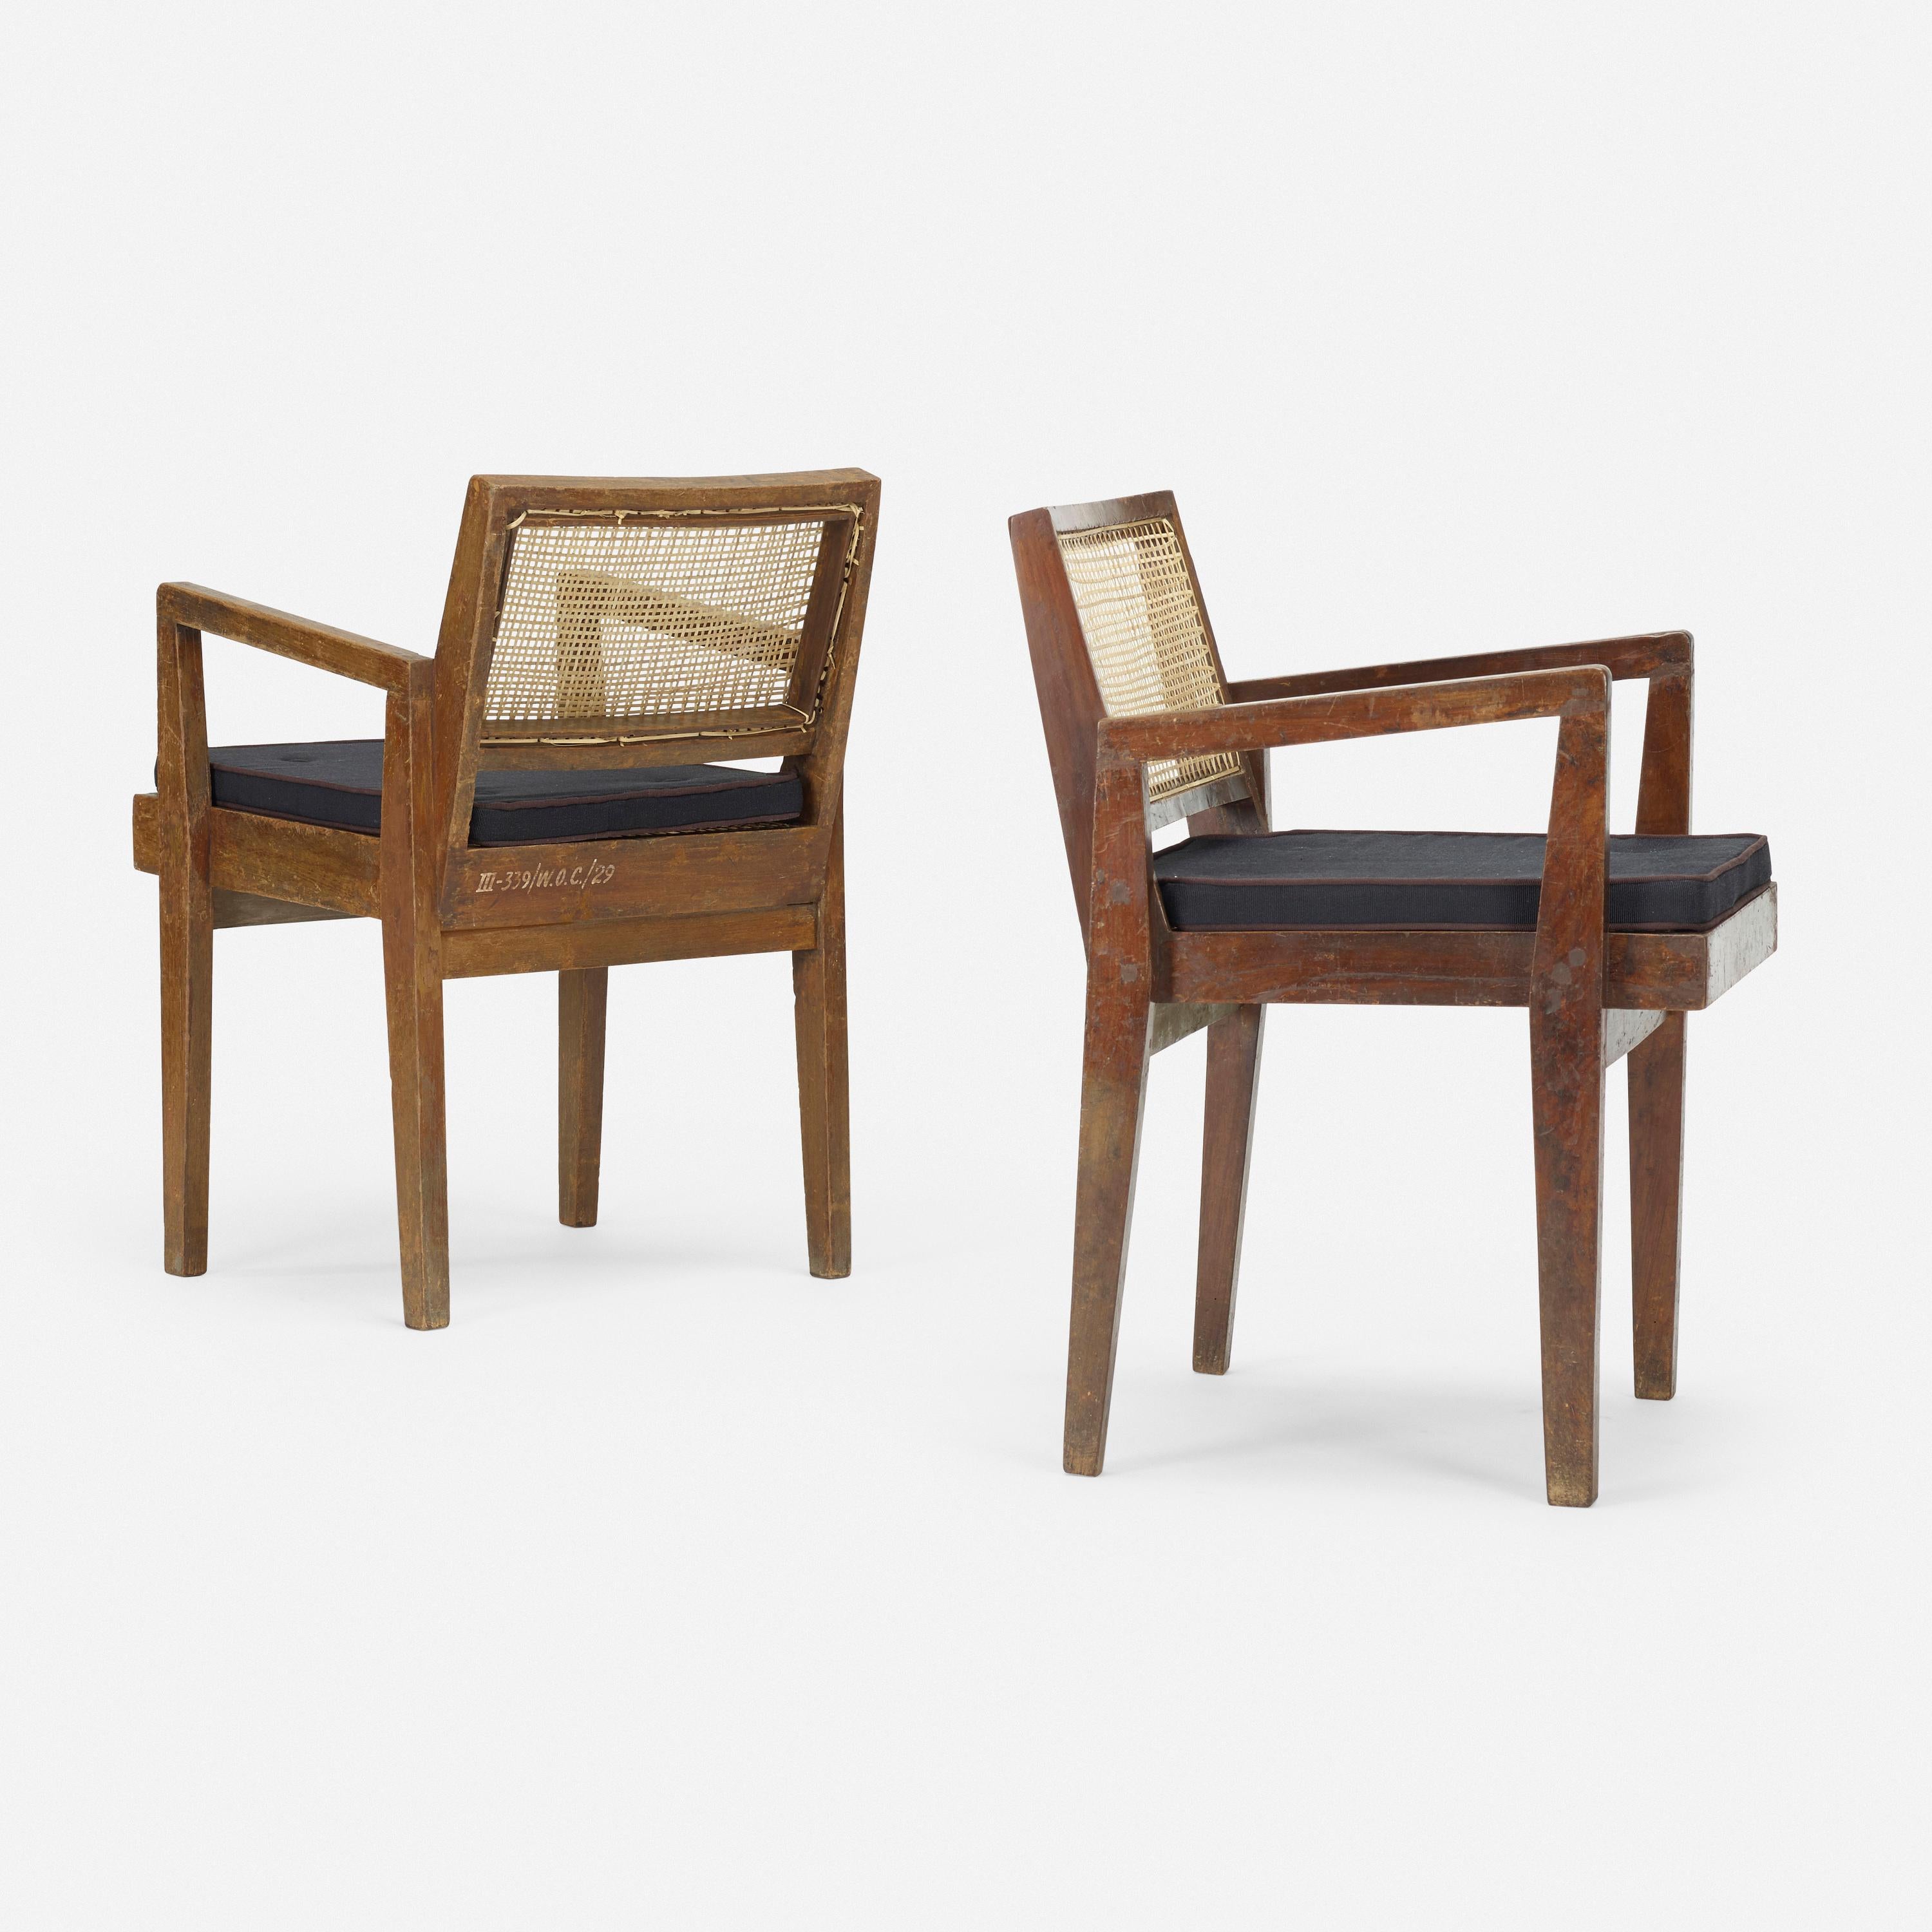 Mid-Century Modern Pierre Jeanneret Armchairs from Chandigarh, pair, c. 1955 For Sale